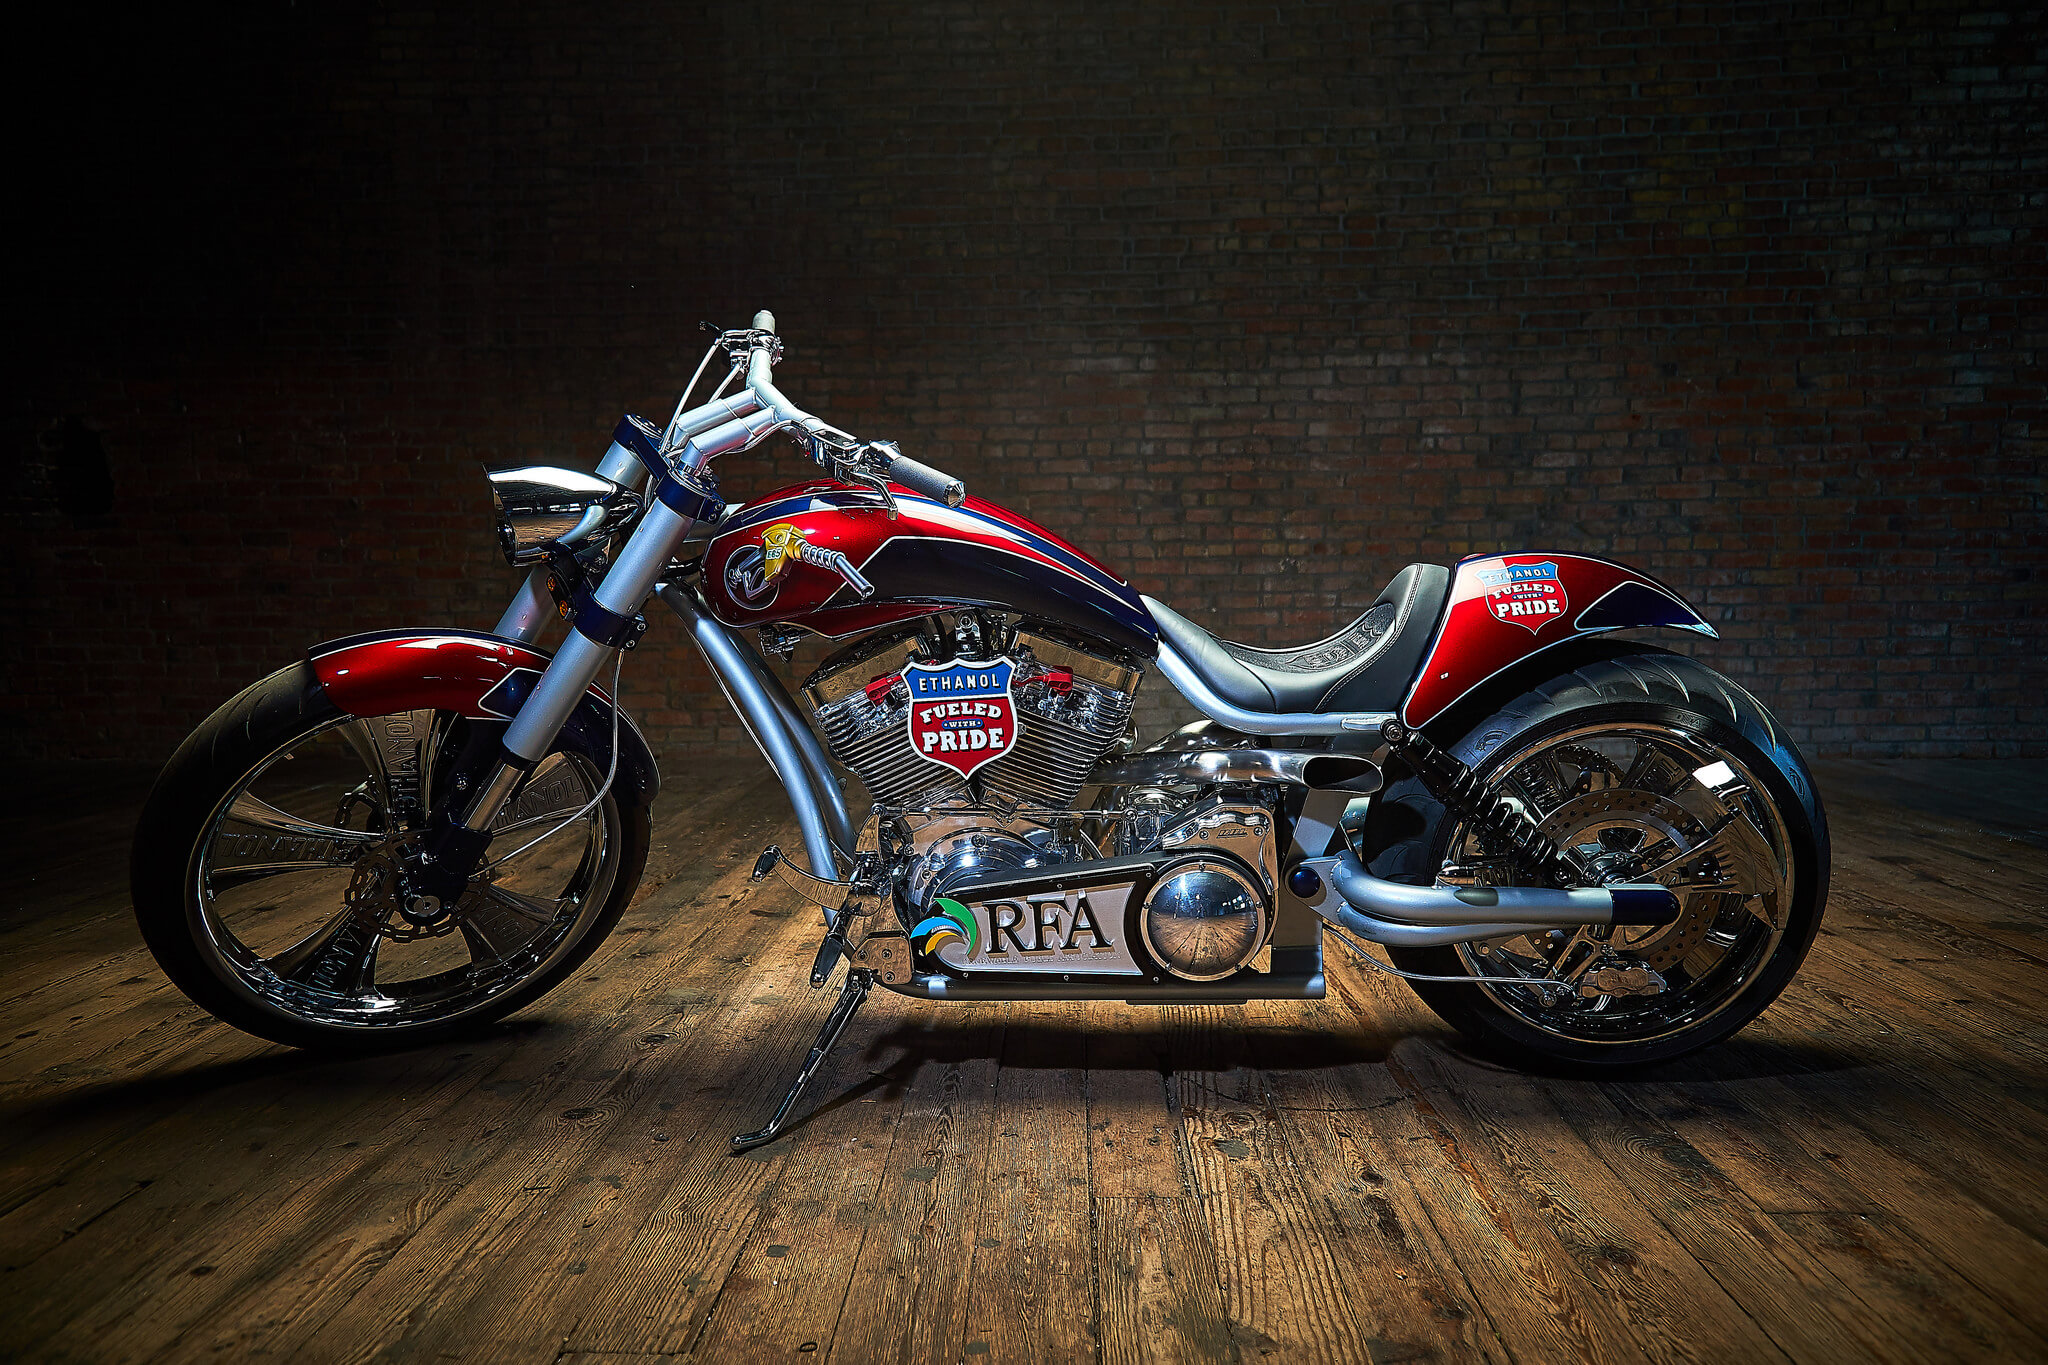 American Chopper and RFA Produce E85-fueled motorcycle